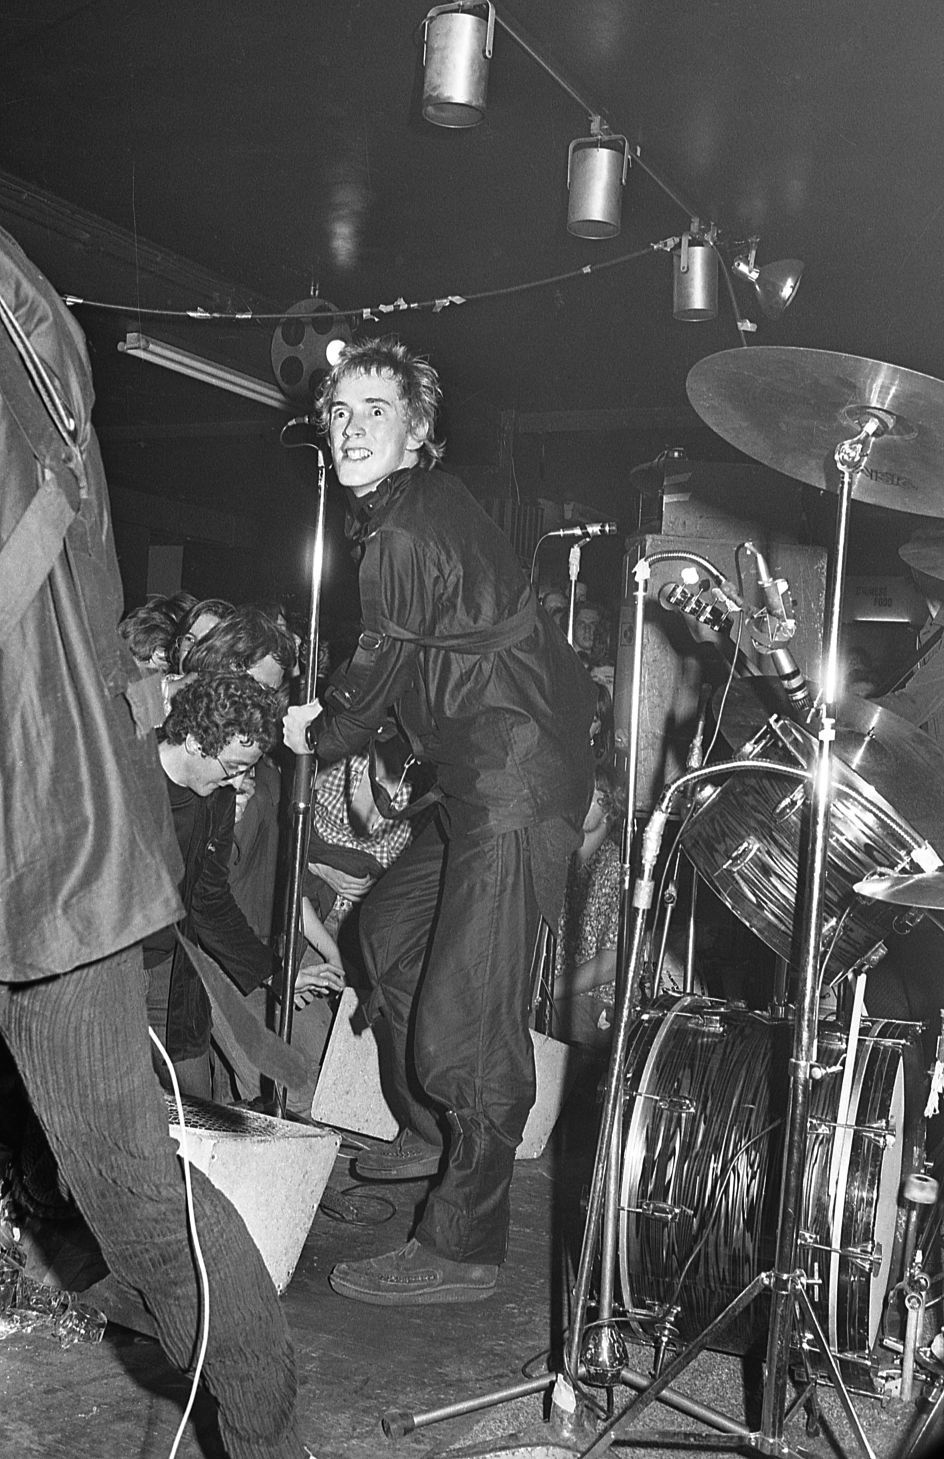 John Lydon at the 1976 Punk Special by Barry Plummer